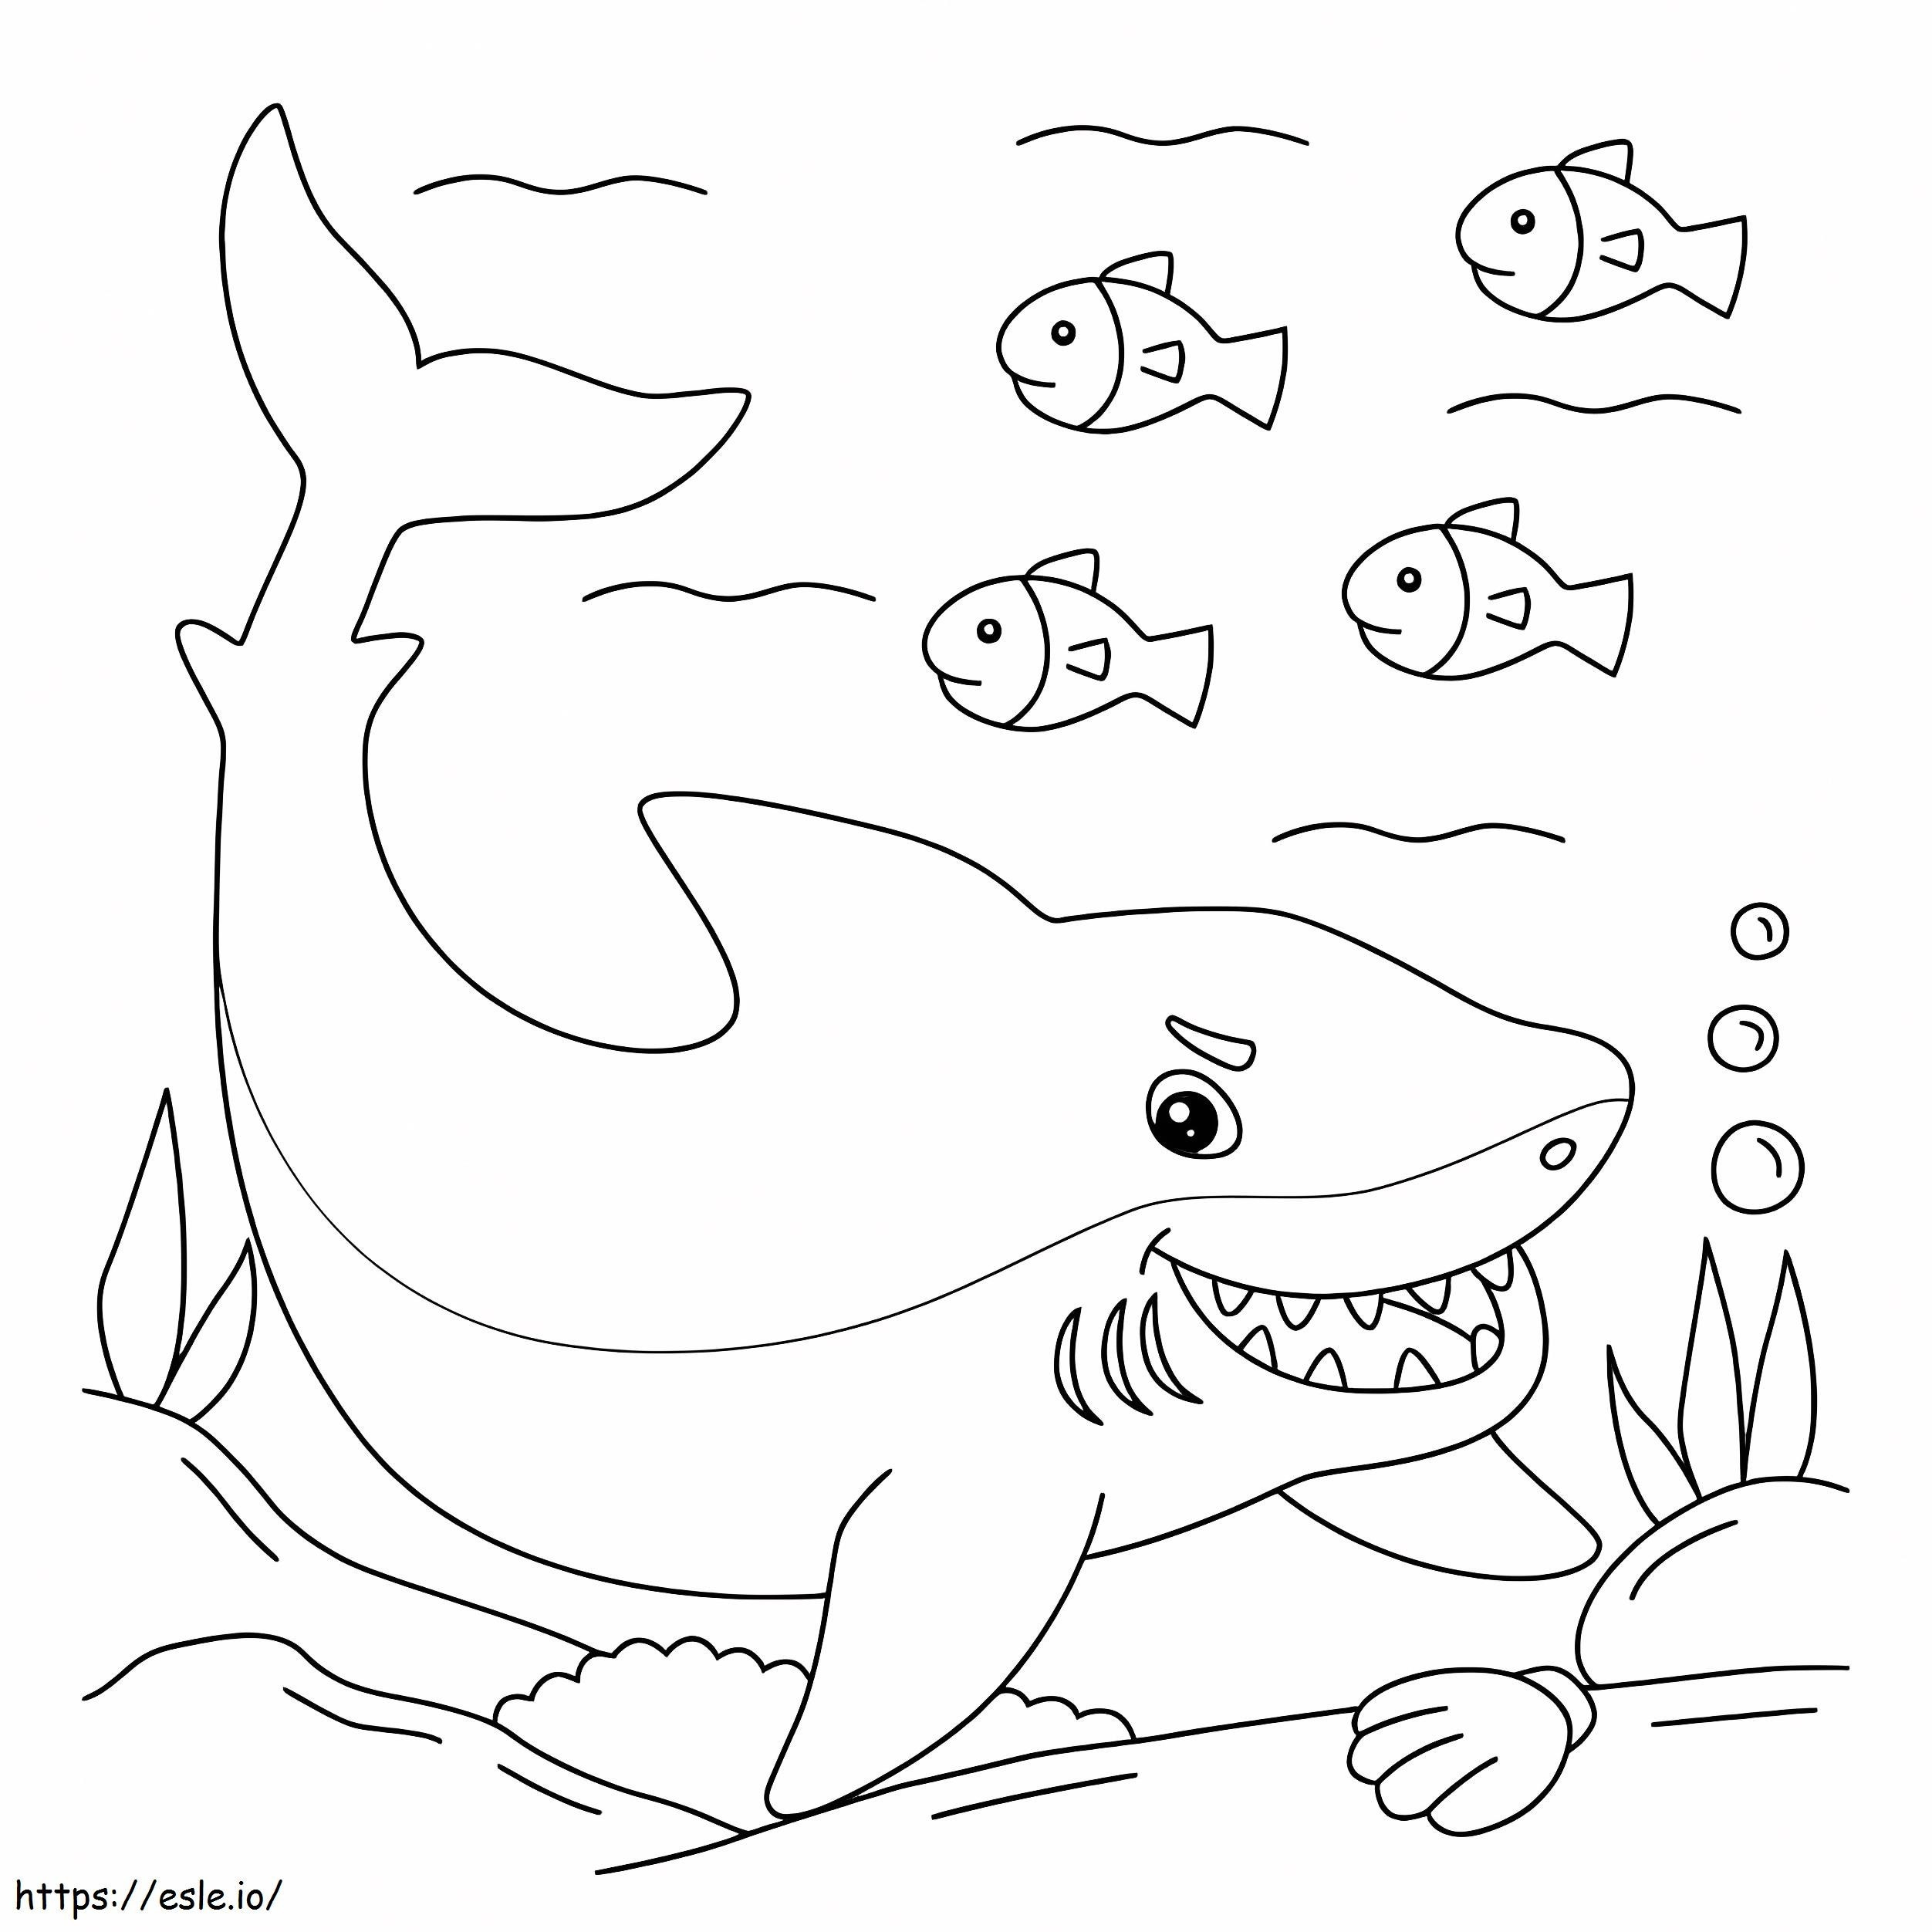 Fun Shark With Four Fish coloring page